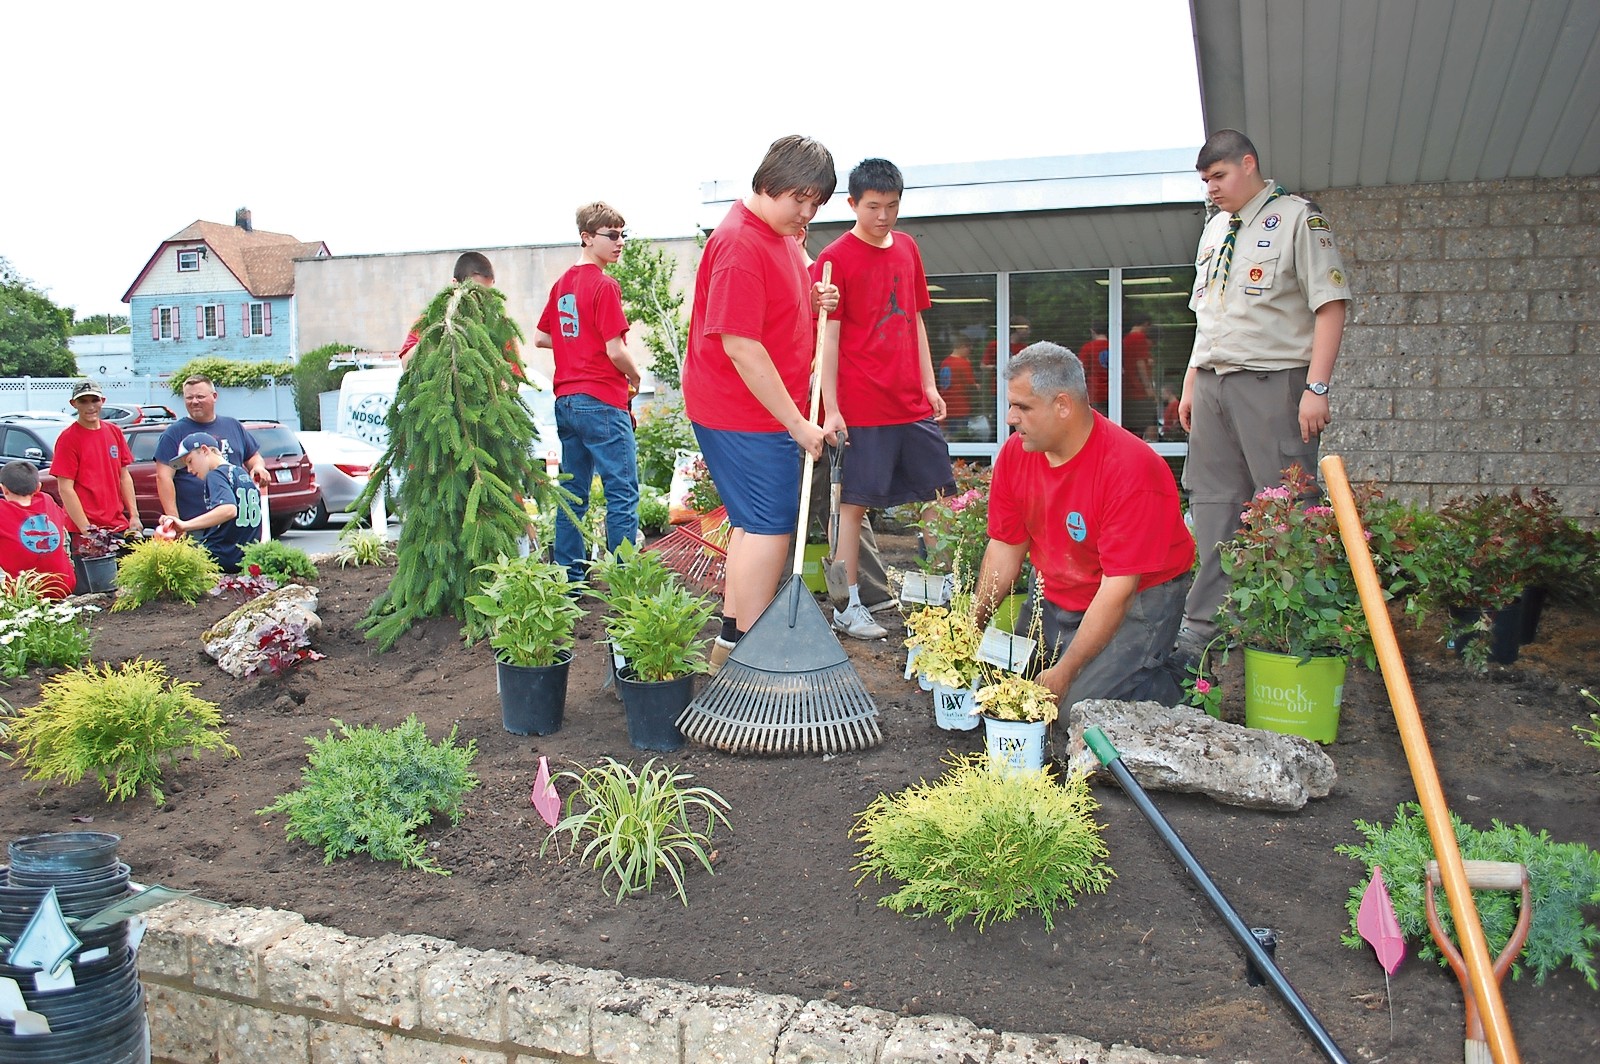 Boy Scout John Vaiano, far right, supervised his fellow Scouts who planted bushes and flowers outside the Wantagh Public Library on June 11.